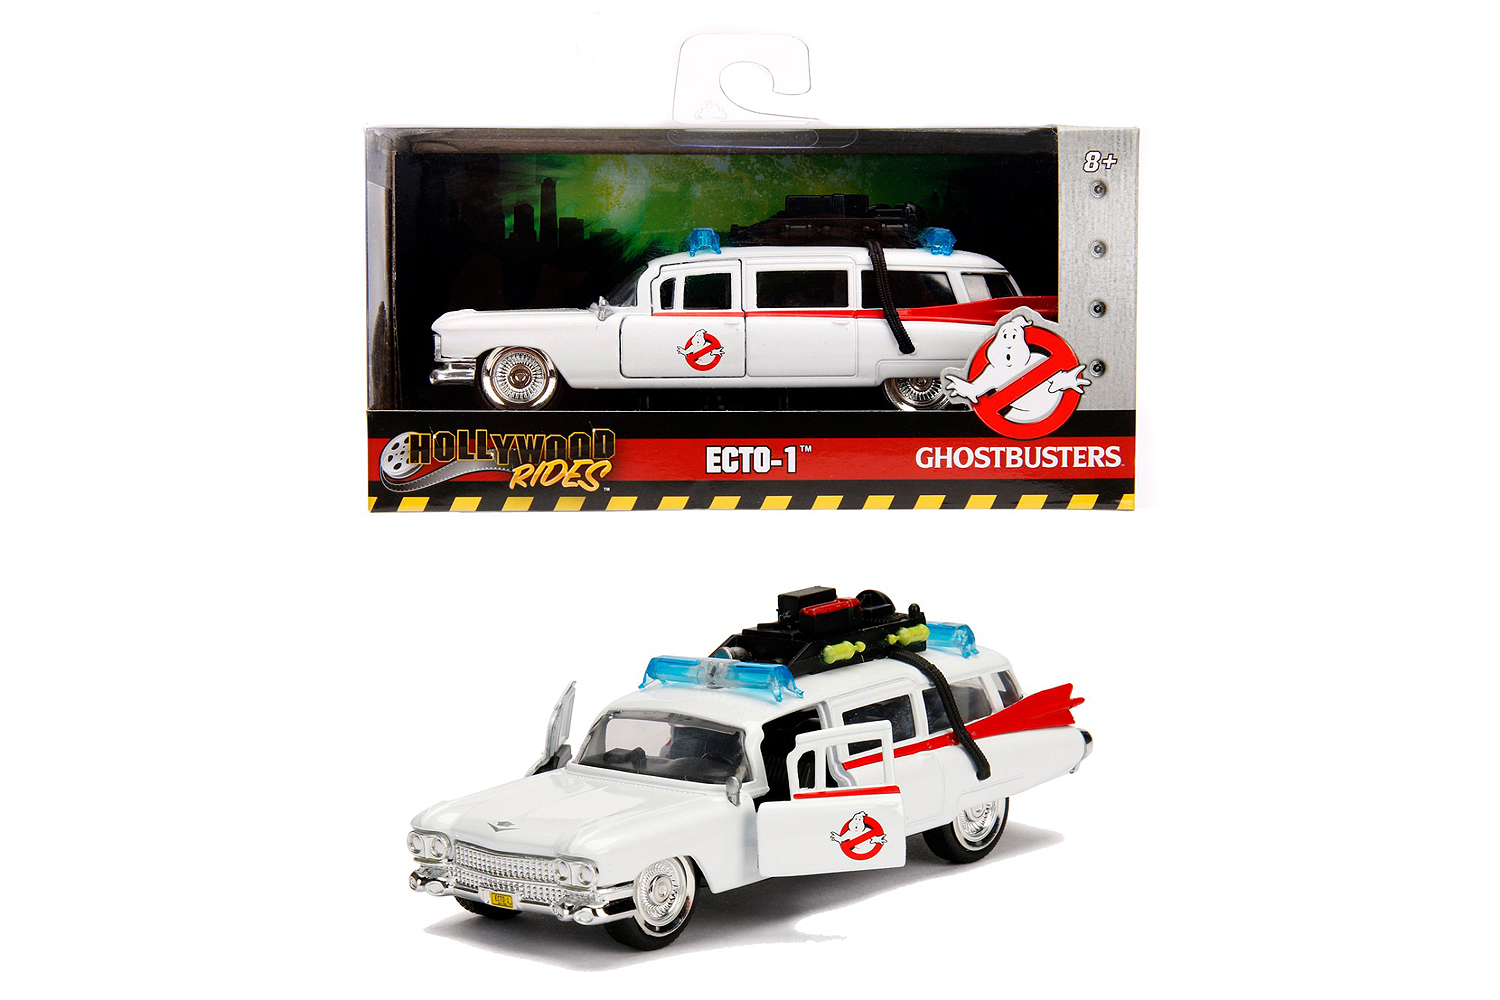 GHOSTBUSTERS DIECAST MODEL 1/32 1959 CADILLAC ECTO-1